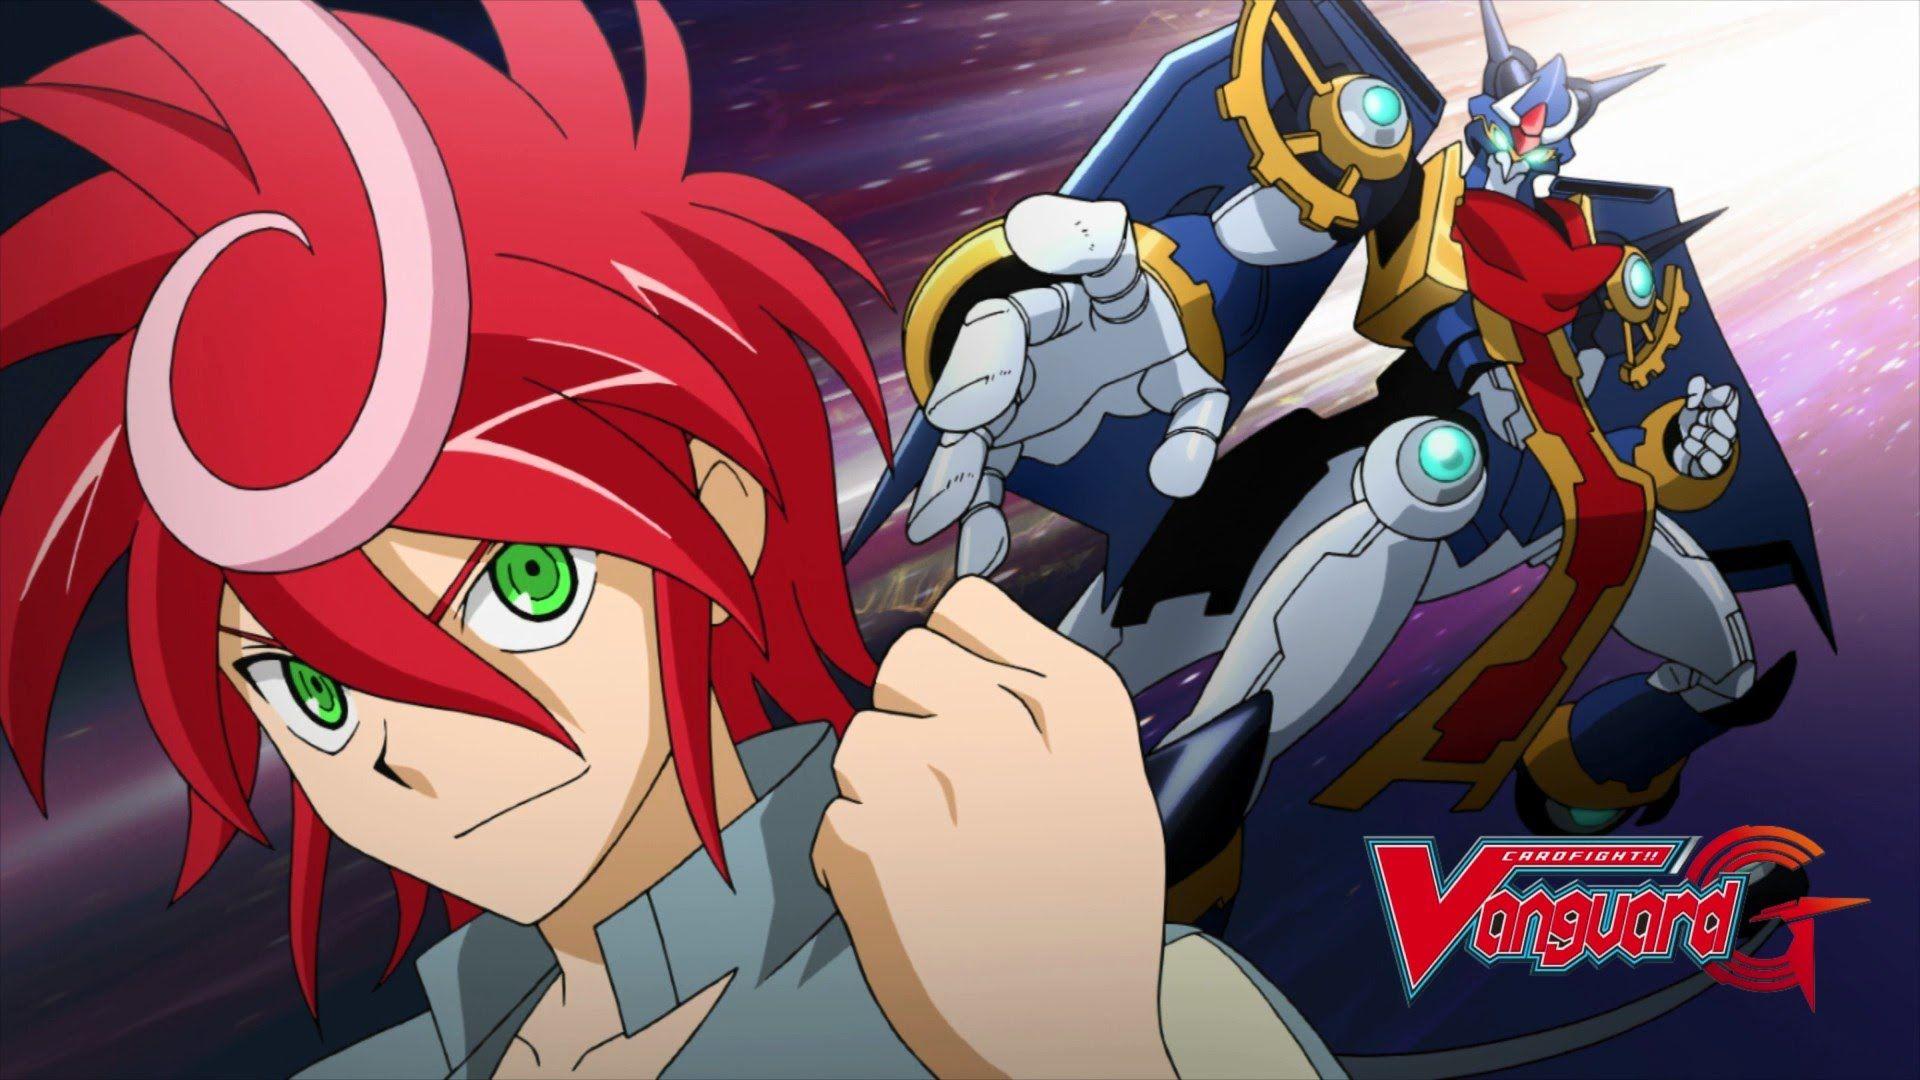 Episode 14 Cardfight!! Vanguard G Official Animation